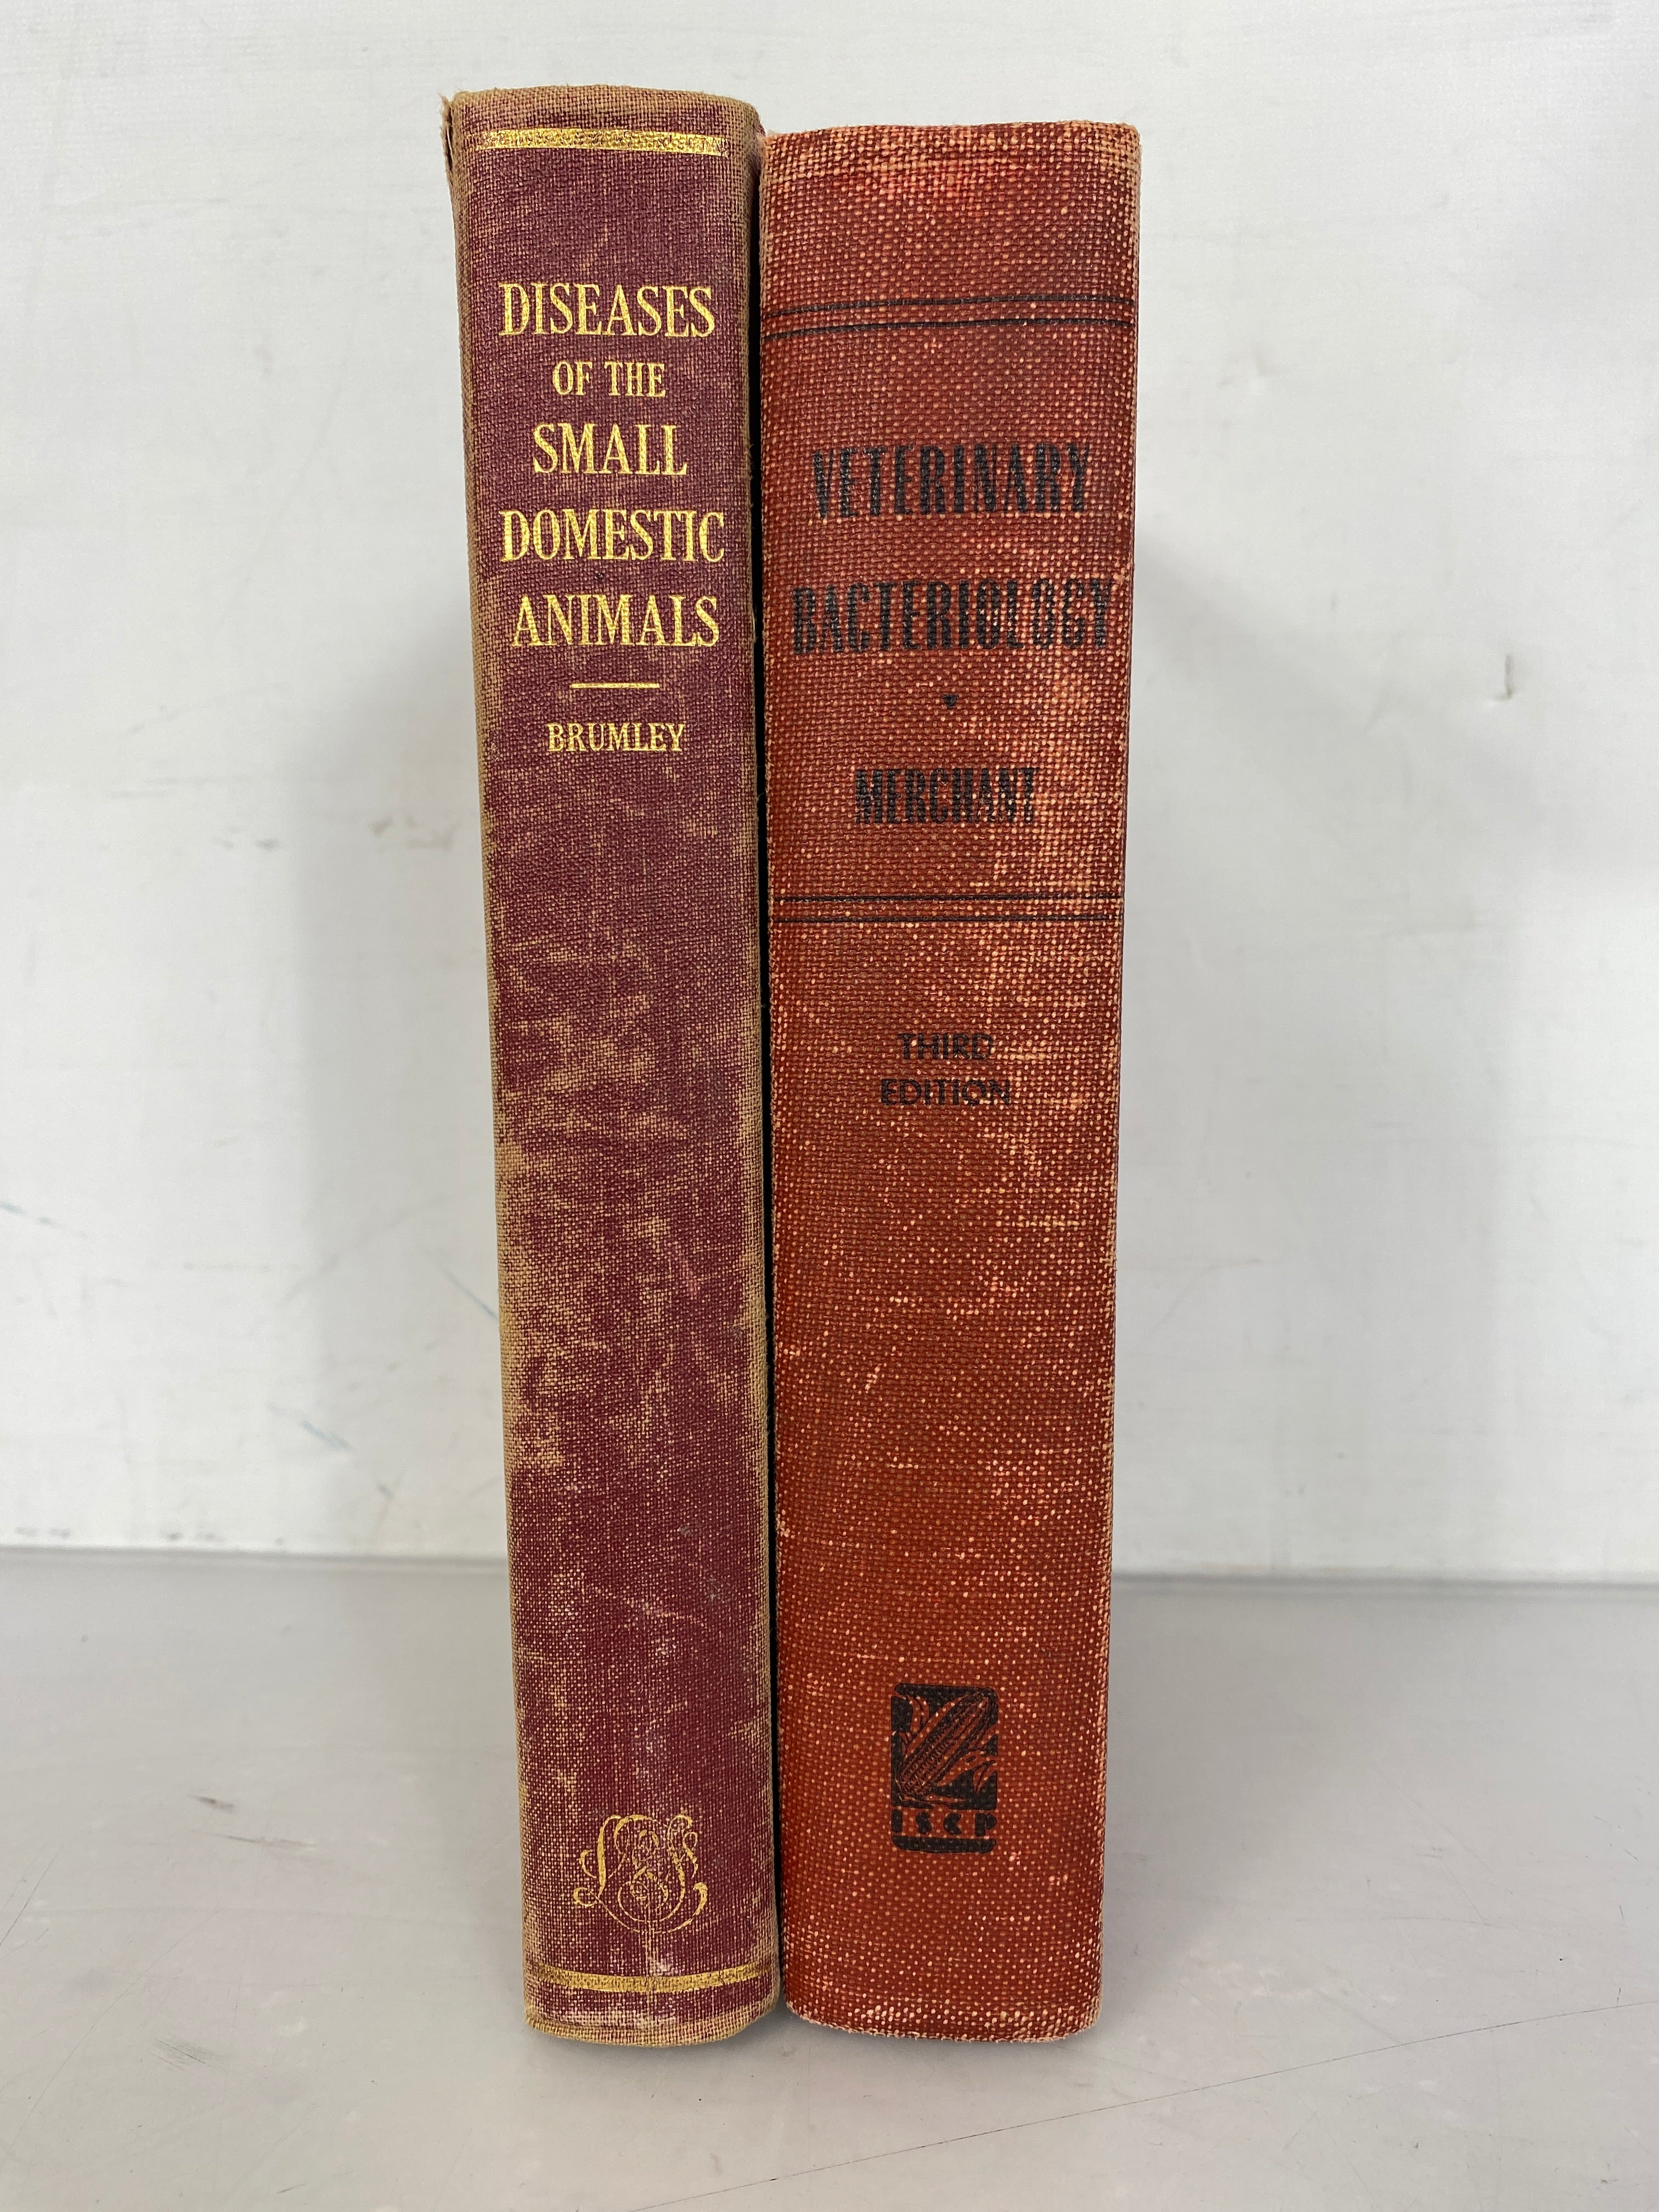 Lot of 2 Vintage Veterinary Texts: Diseases of the Small Domestic Animals (1948) and Veterinary Bacteriology (1946) HC